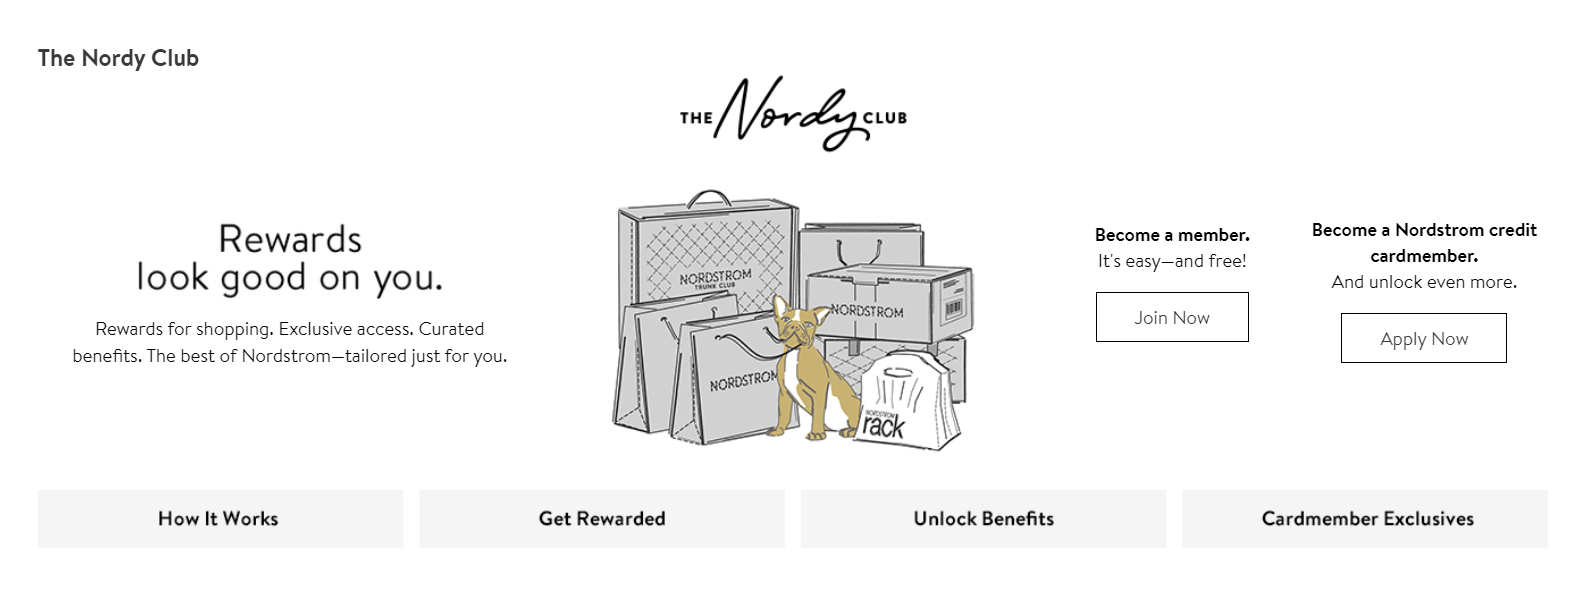 Nordstrom loyalty campaign